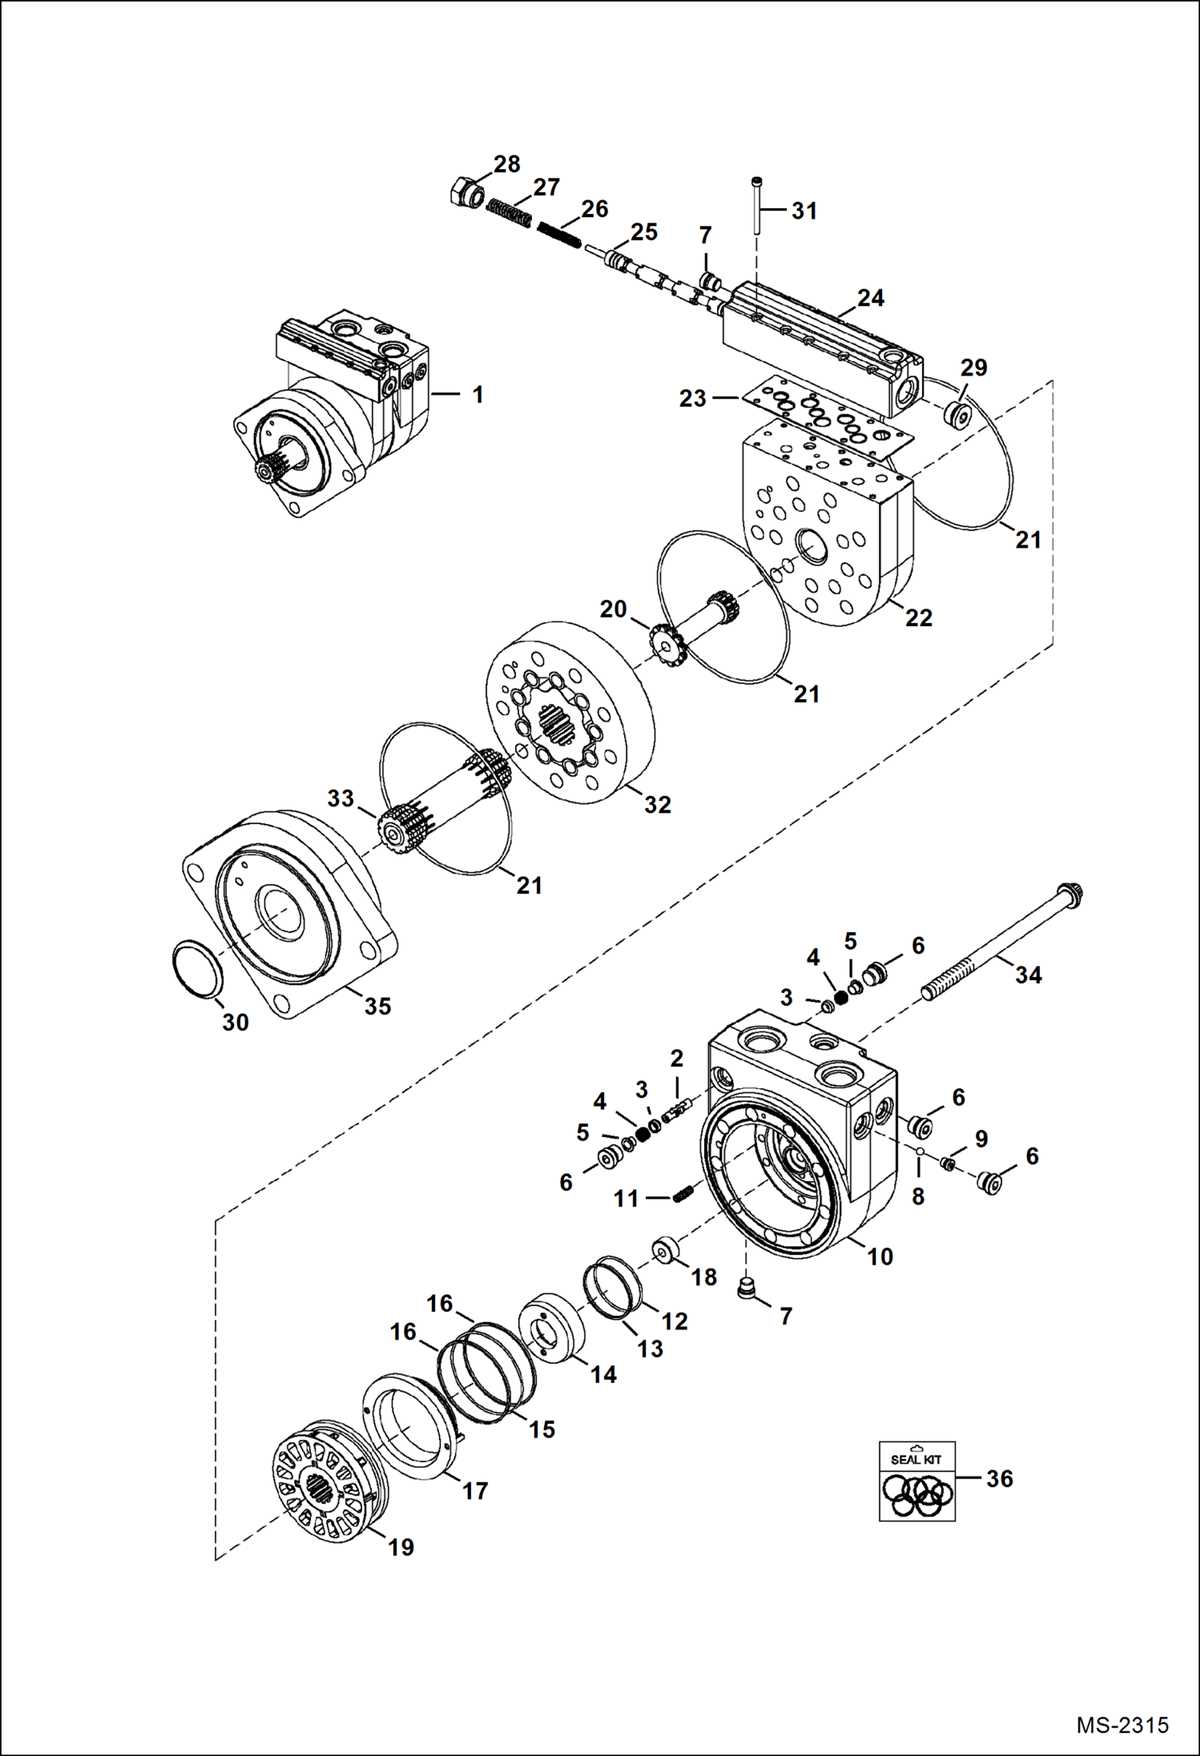 Importance of Knowing the Parts Diagram